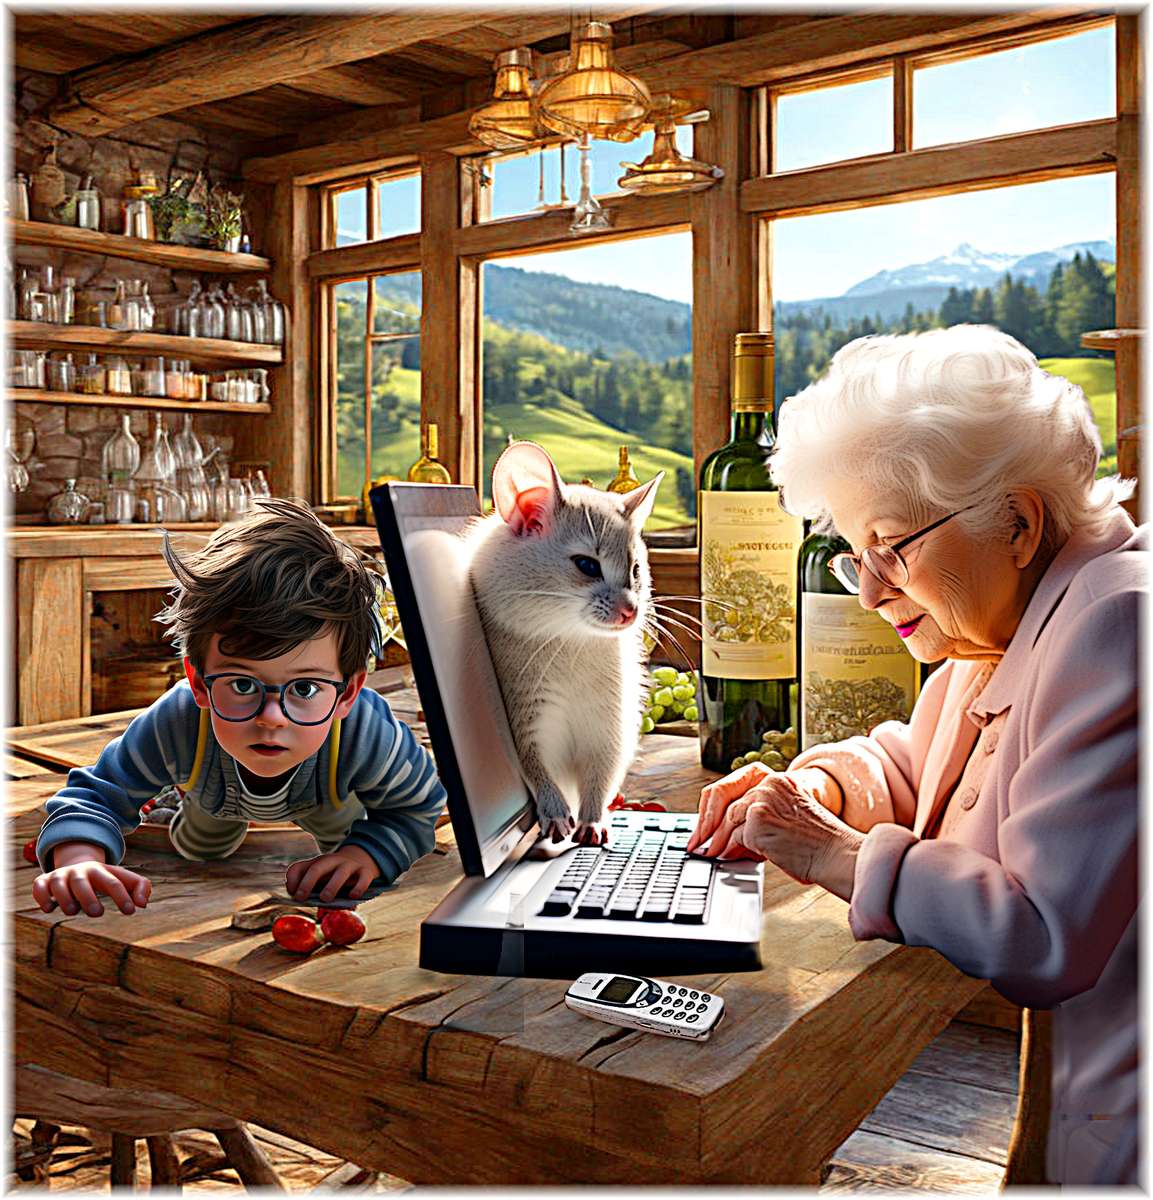 Granny has problems with her first touch screen. online puzzle